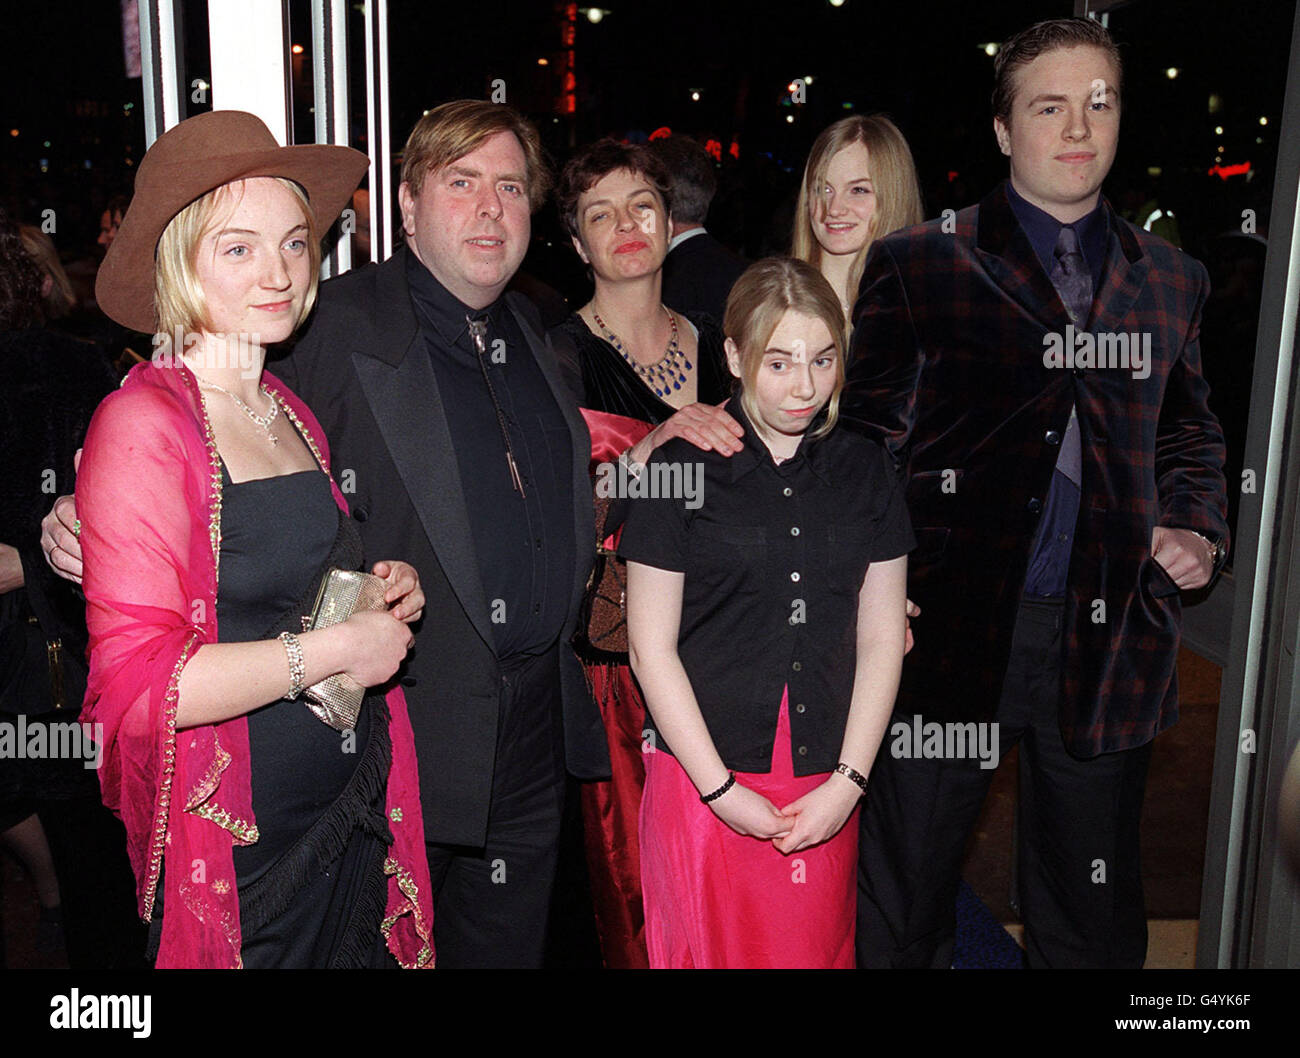 Actor Timothy Spall (2nd Left) with his wife Shane (C) and family arrive for the Gala Premiere of Spall's latest film Shakespeare's 'Love's Labour's Lost', directed by Kenneth Branagh, at the Odeon Leicester Square in London. Stock Photo